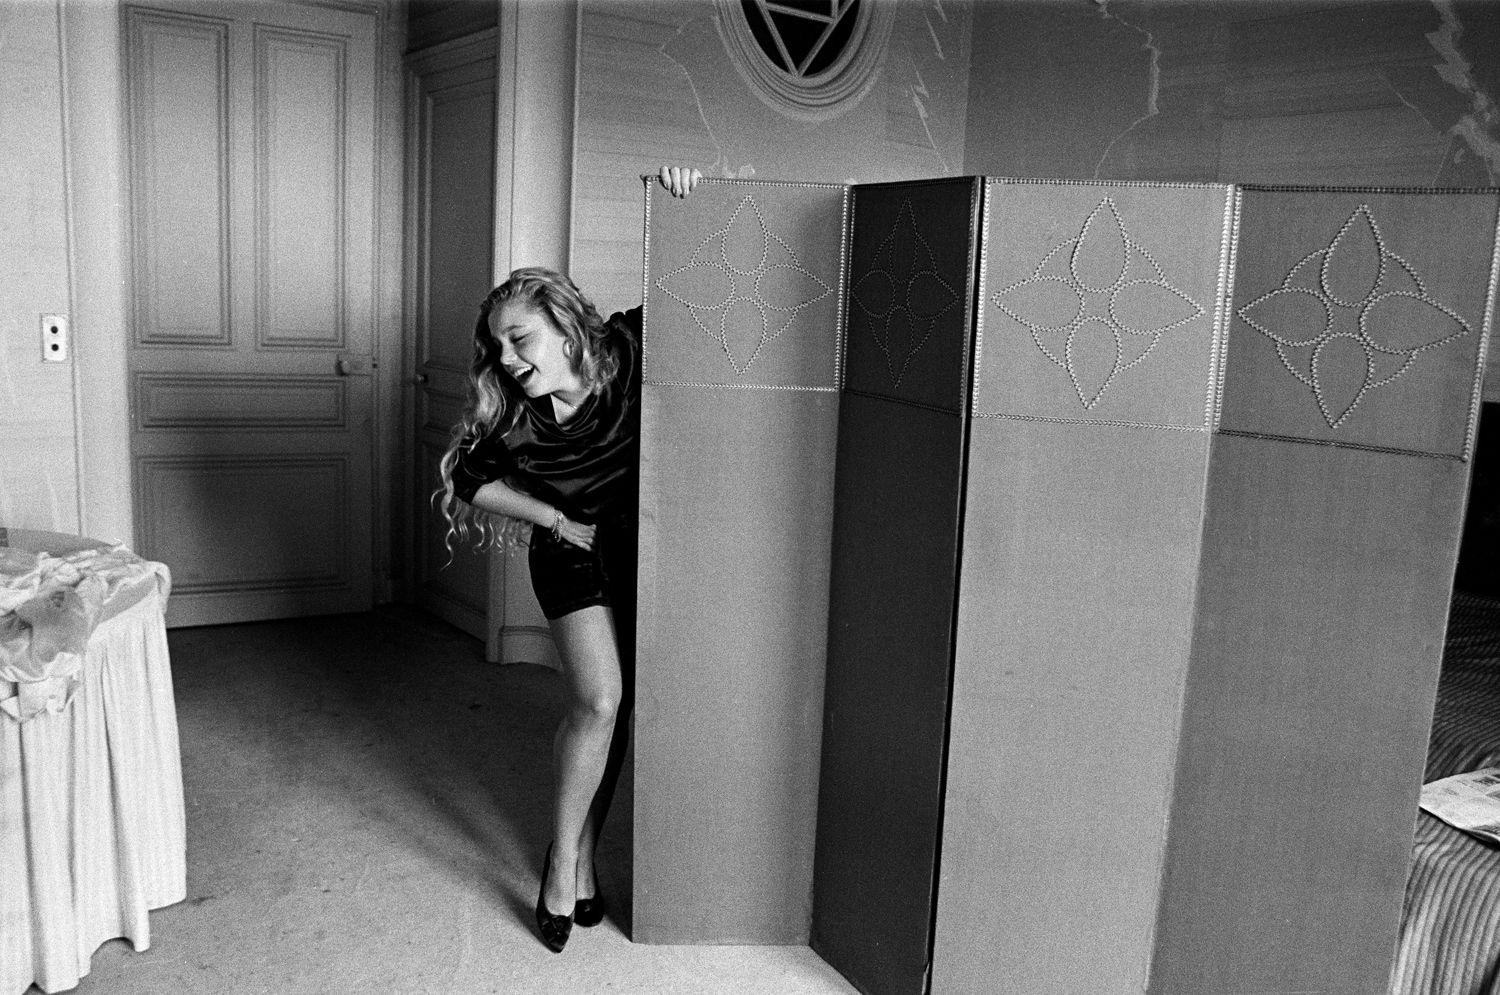 Silas Shabelewska Black and White Photograph - And Then She Laughed (THE MONTE-CARLO series)